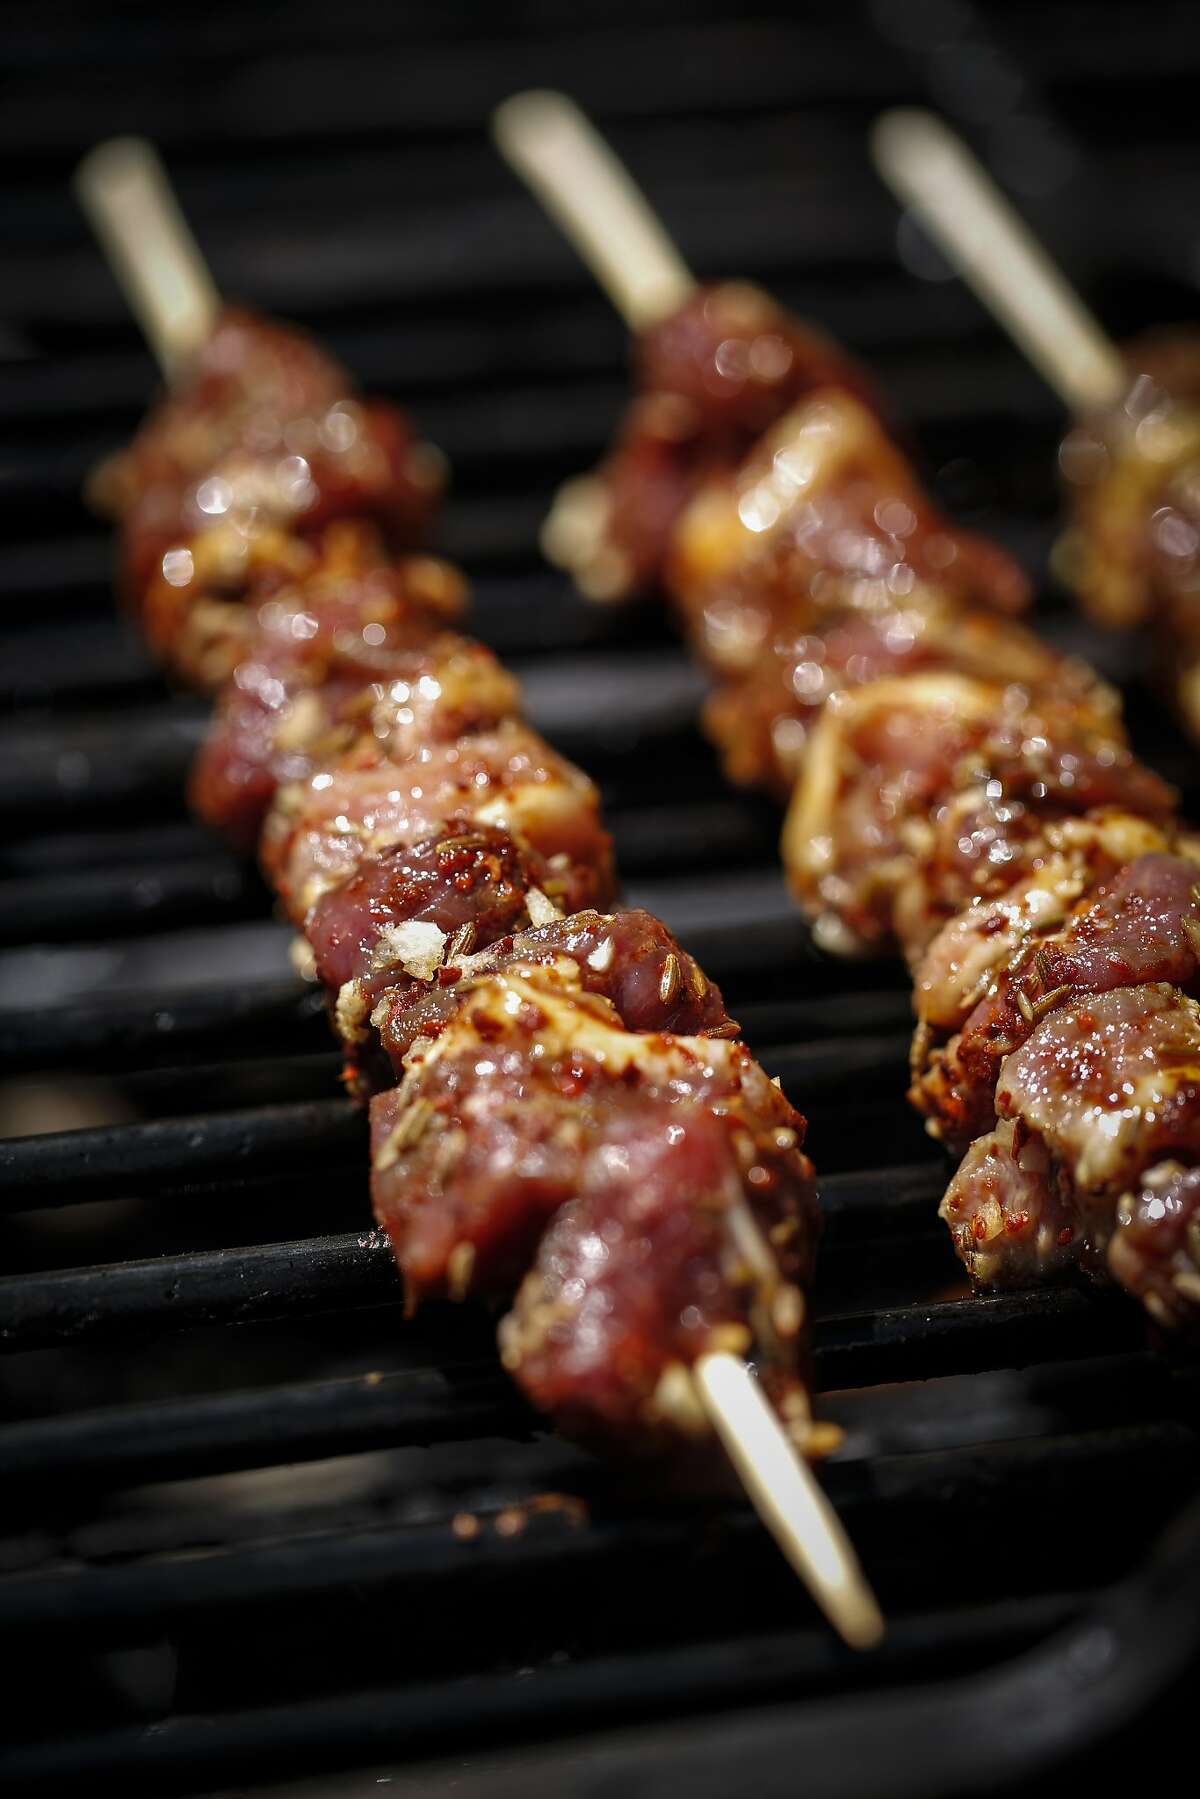 Lamb skewers dusted with chiles, cumin and garlic are seen on Thursday, Aug. 27, 2015 in San Francisco, Calif.